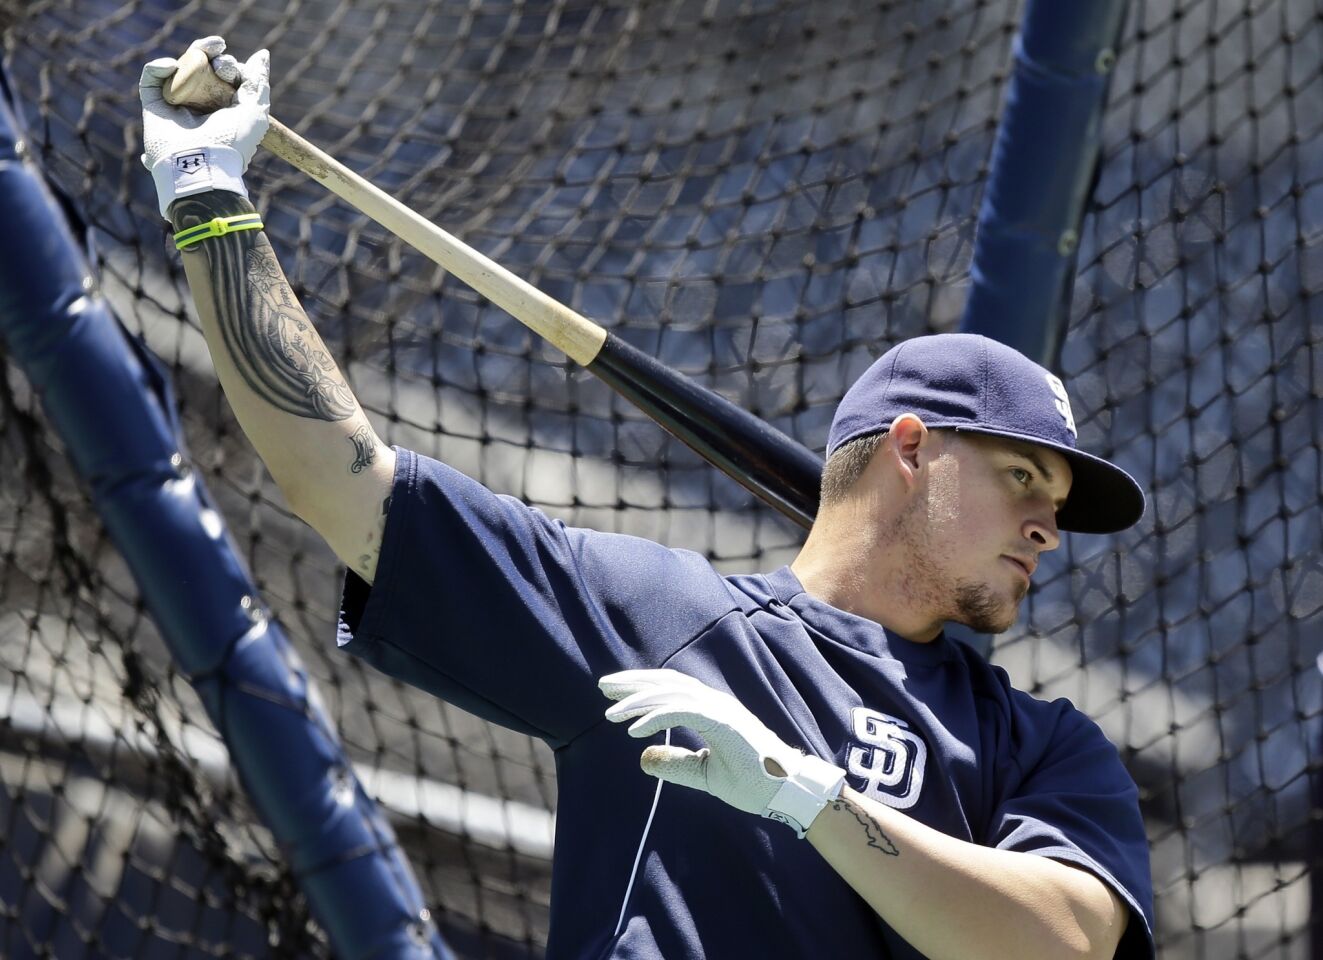 San Diego Padres catcher Yasmani Grandal was suspended 50 games in 2012 after testing positive for a high testosterone level.